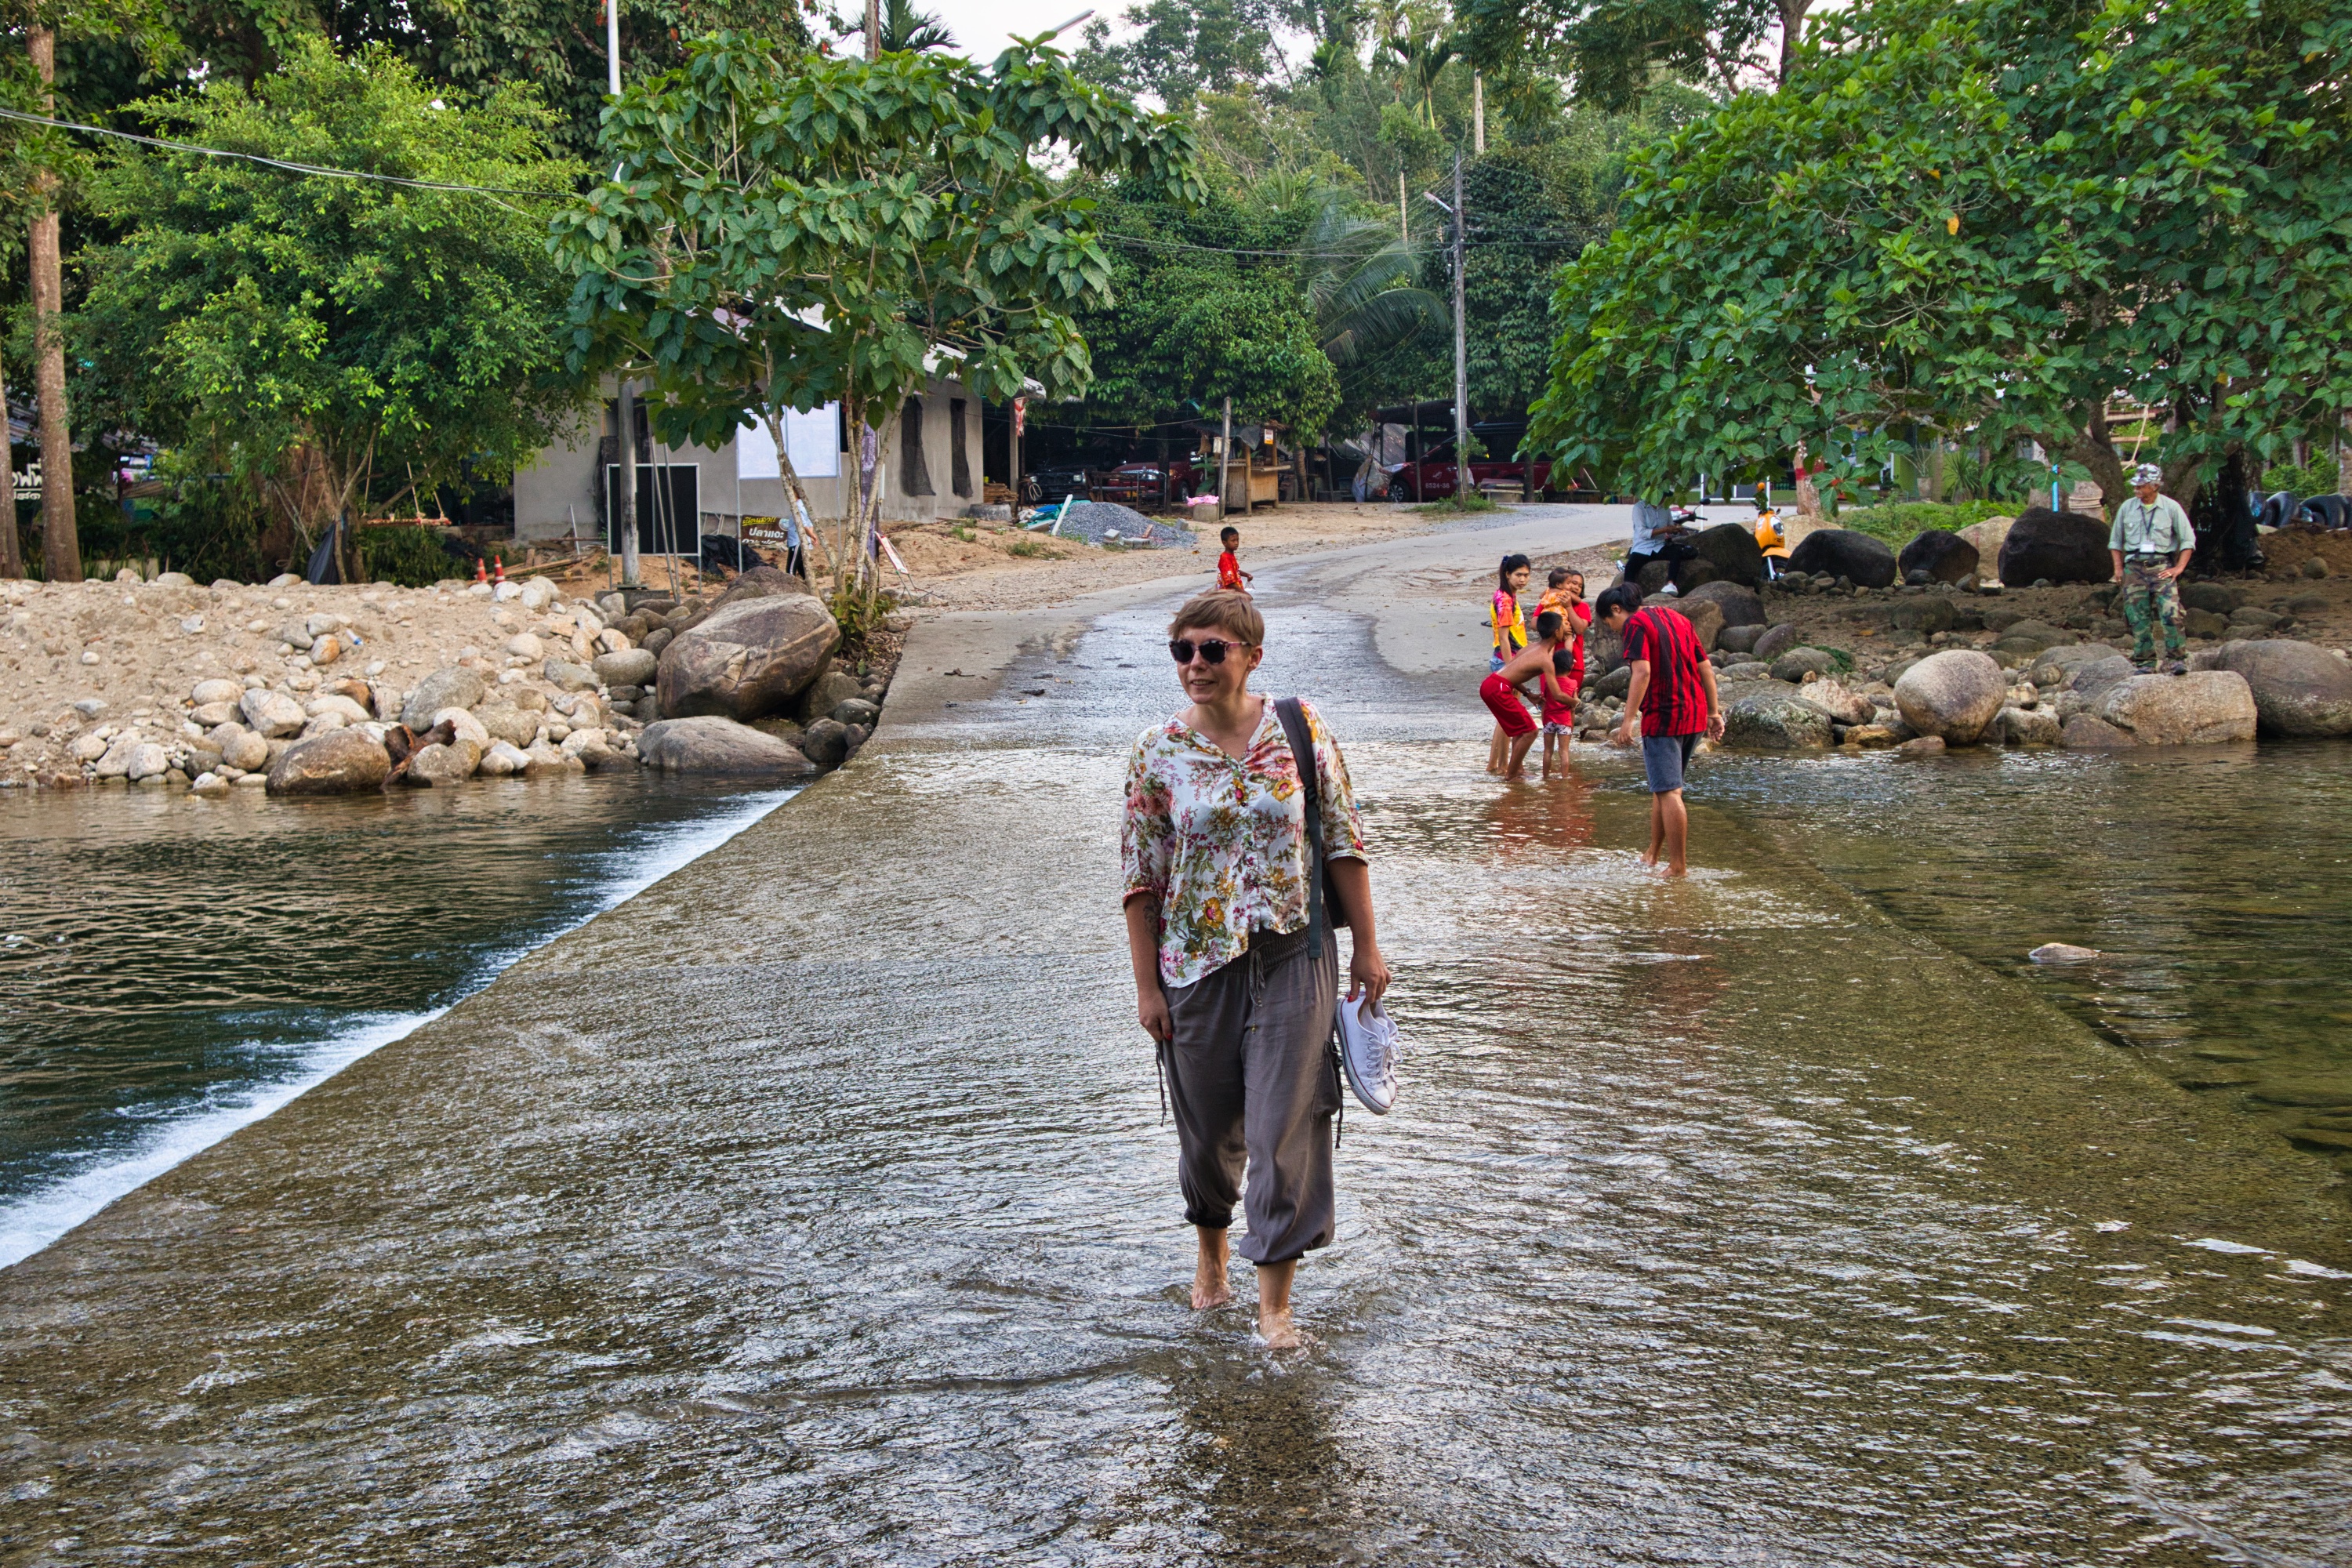 a woman dressed in a flowery shirt walks through the stream in thailand